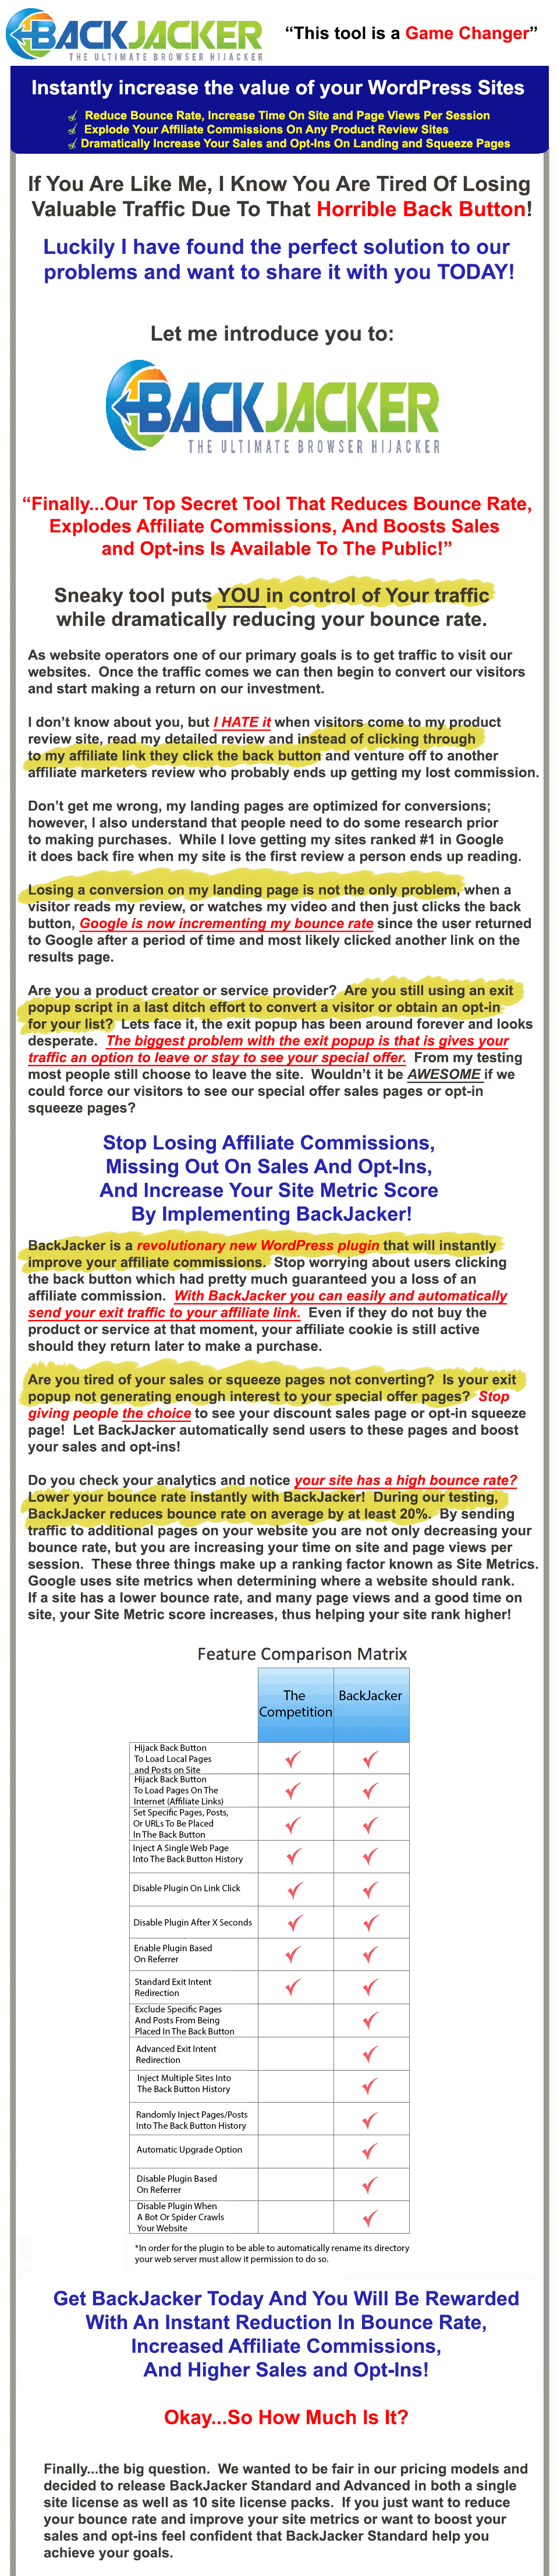 Kill Your Bounce Rate, Increase Affiliate Commissions, Boost Sales & Optins with BackJacker ...